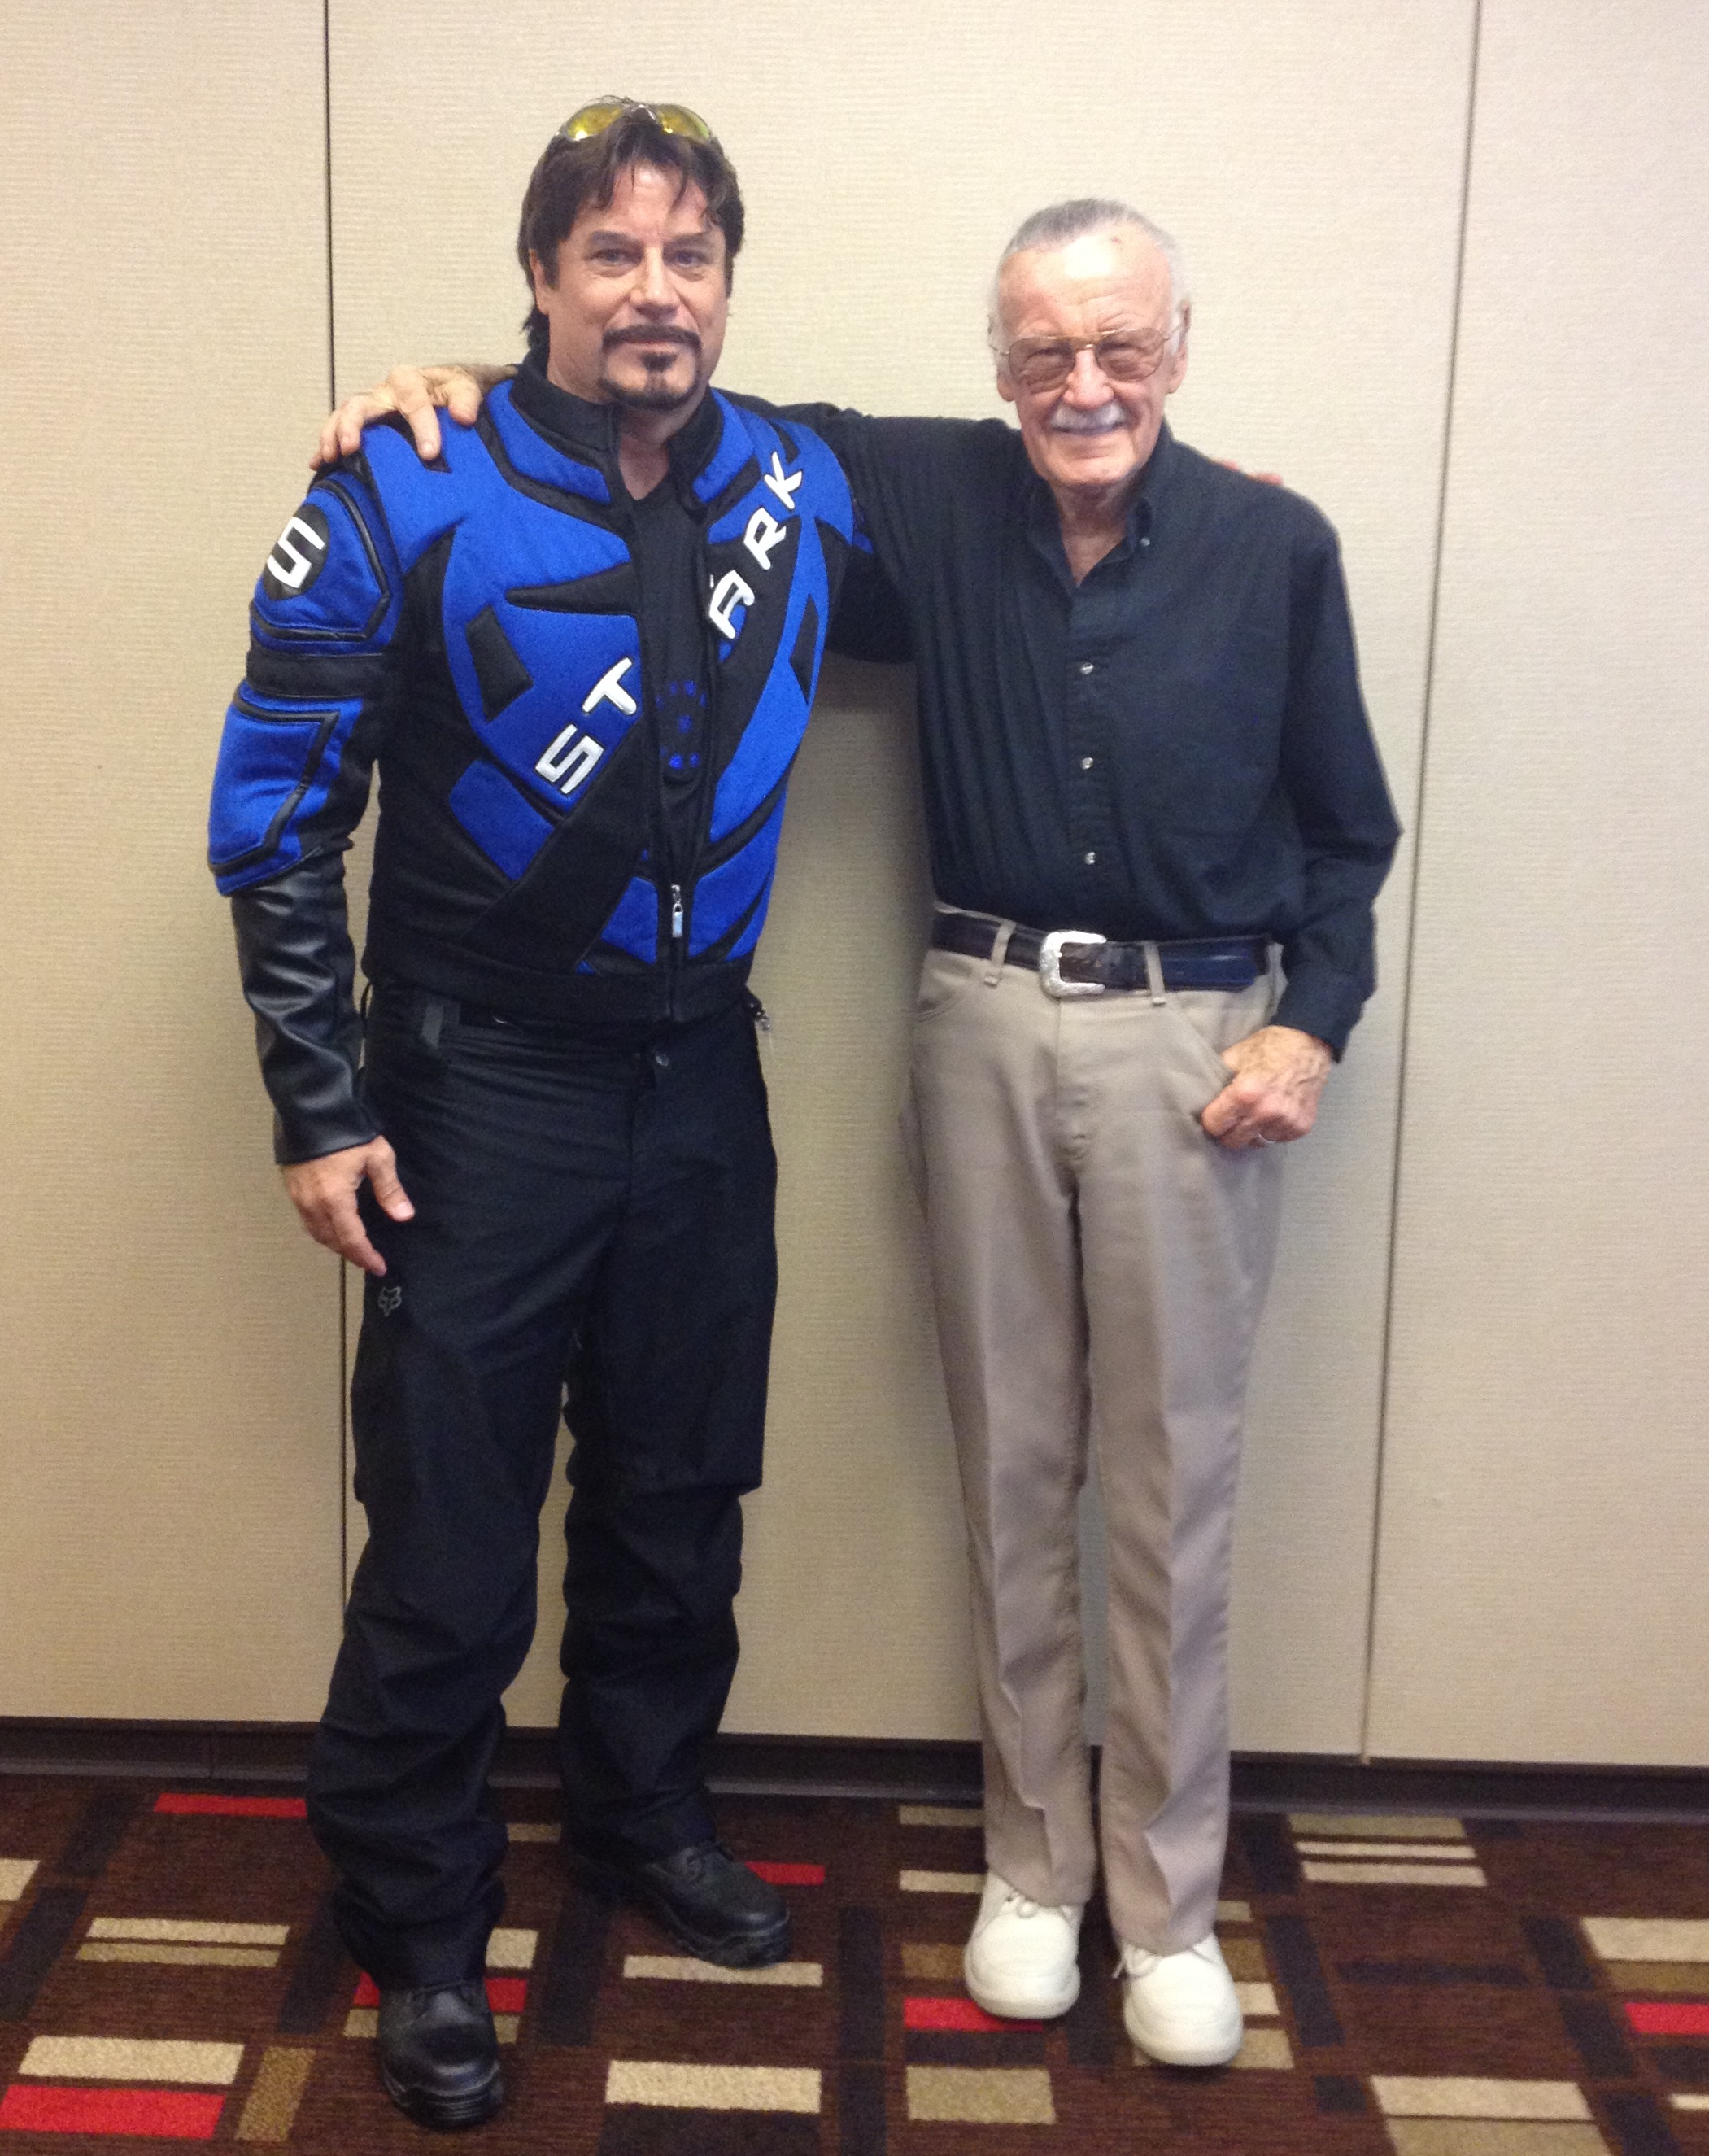 Tony Stark and Stan Lee and I 2012